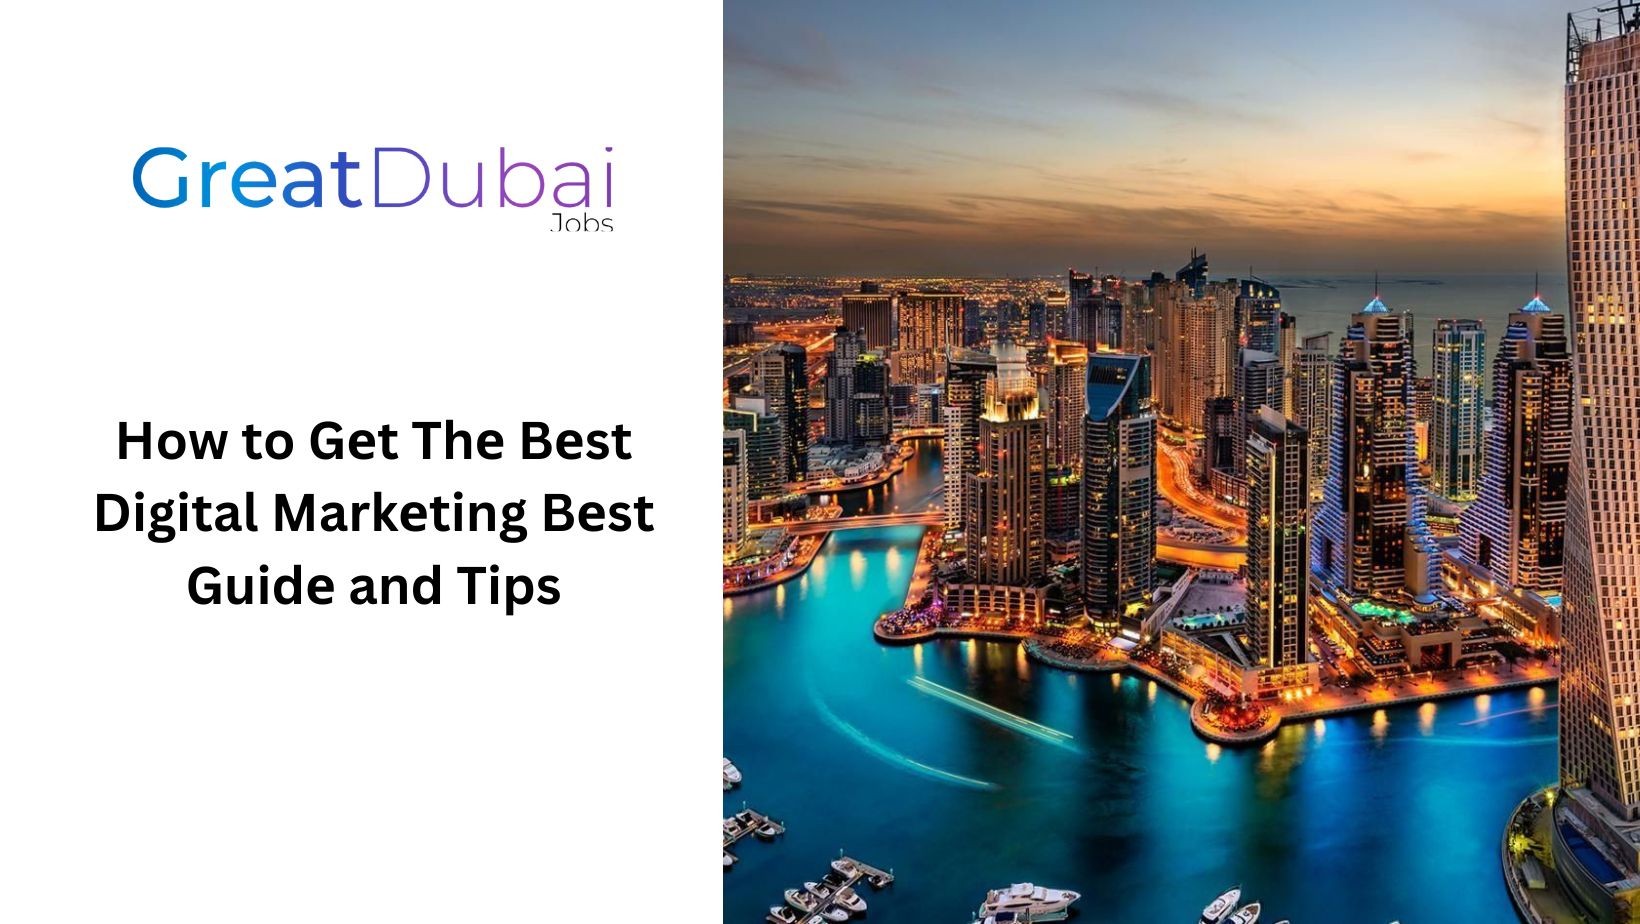 How to Get The Best Digital Marketing Jobs in Dubai Best Guide and Tips